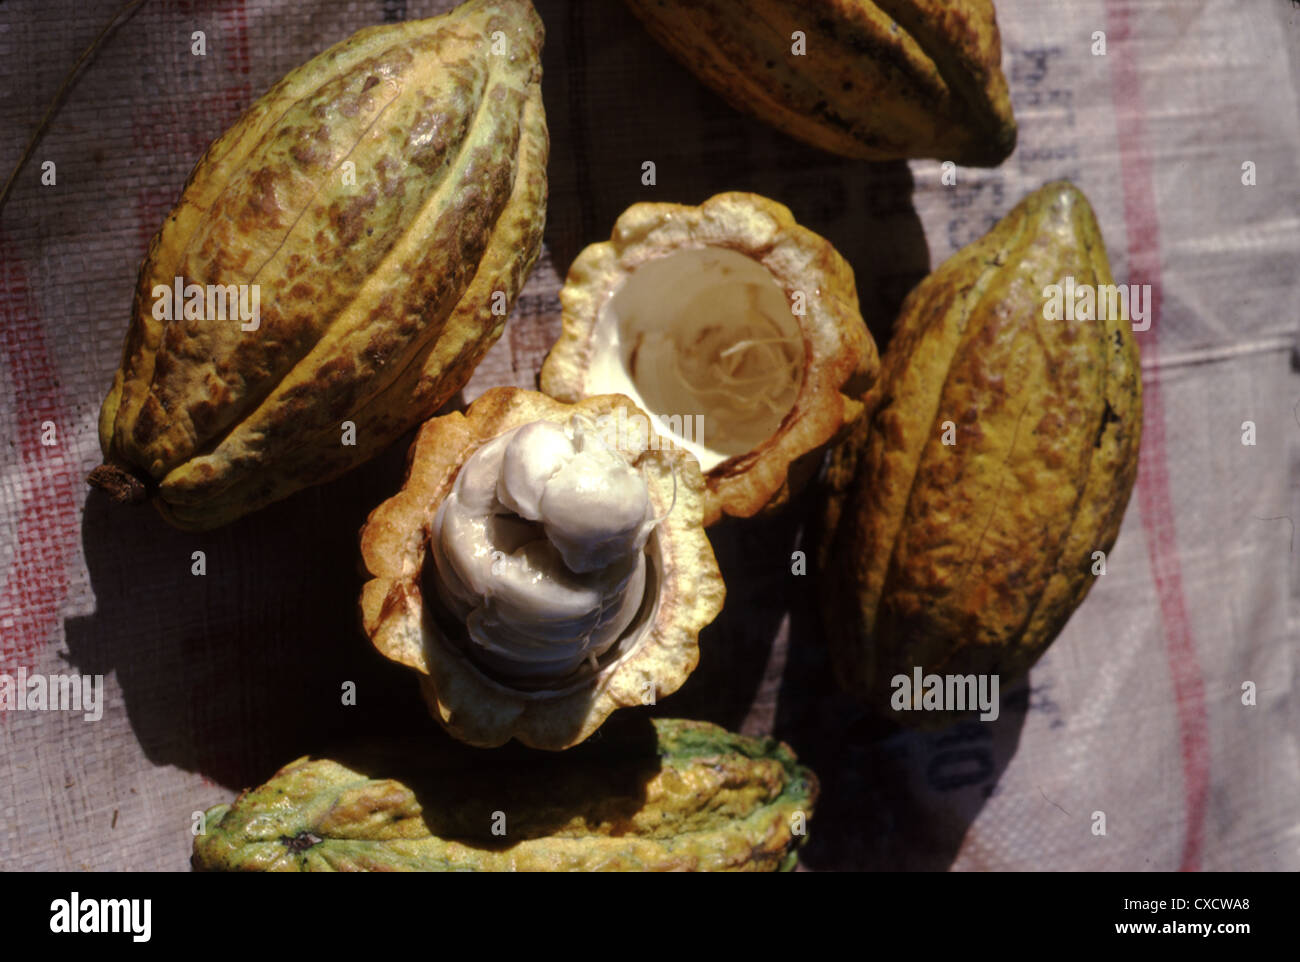 A cocoa pod is cracked open revealing the pulp, Malaysia Stock Photo